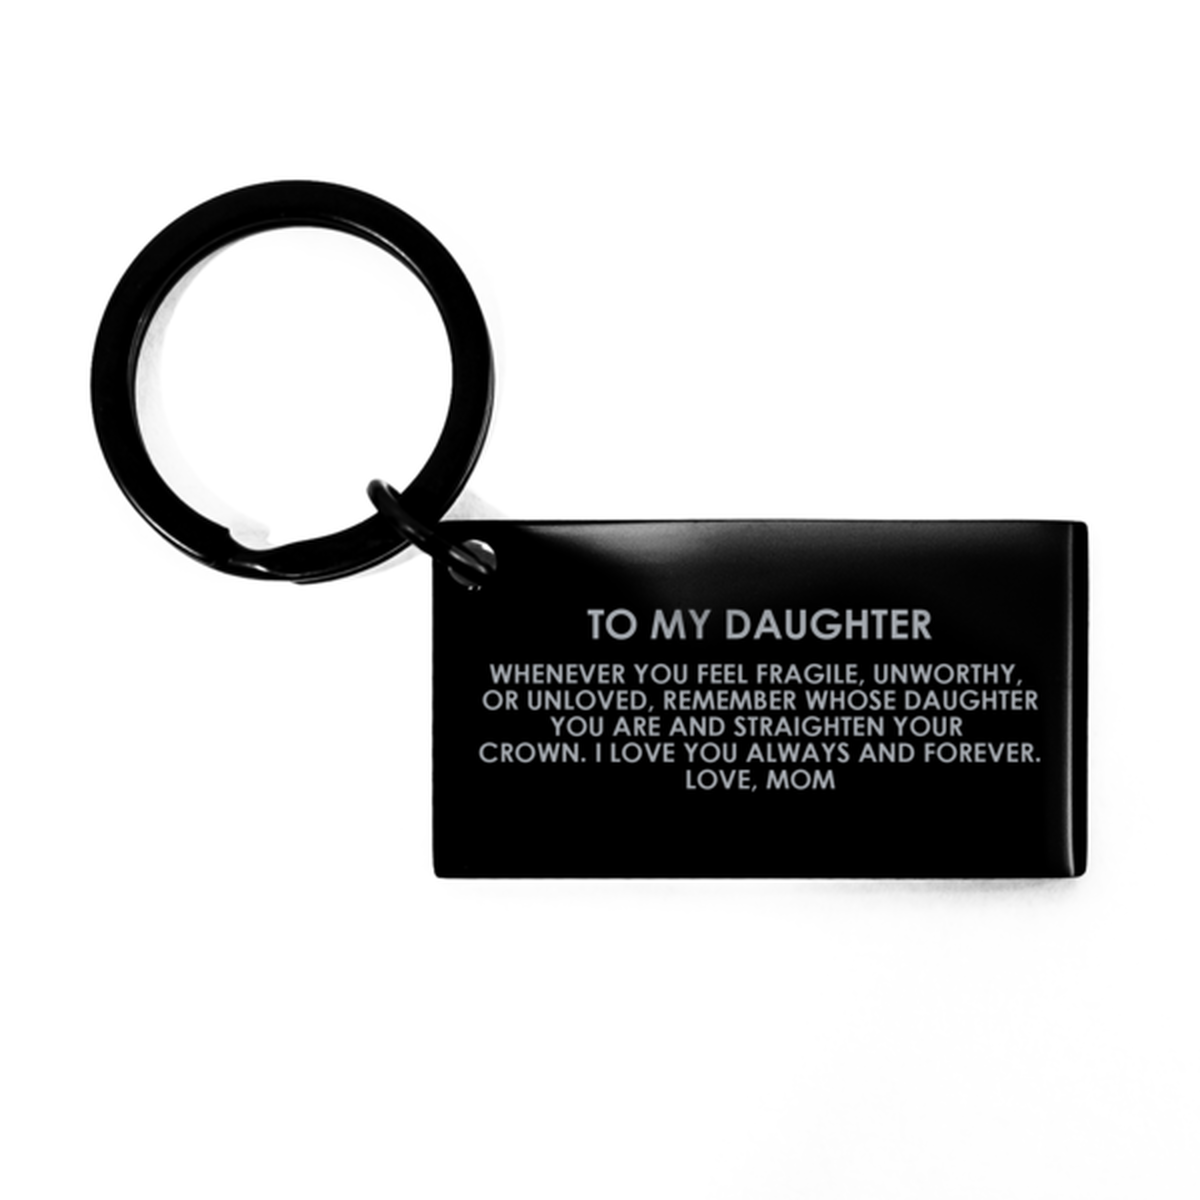 To My Daughter Black Keychain, I Love You Always And Forever, Birthday Gifts For Daughter From Mom, Christmas Gifts For Women